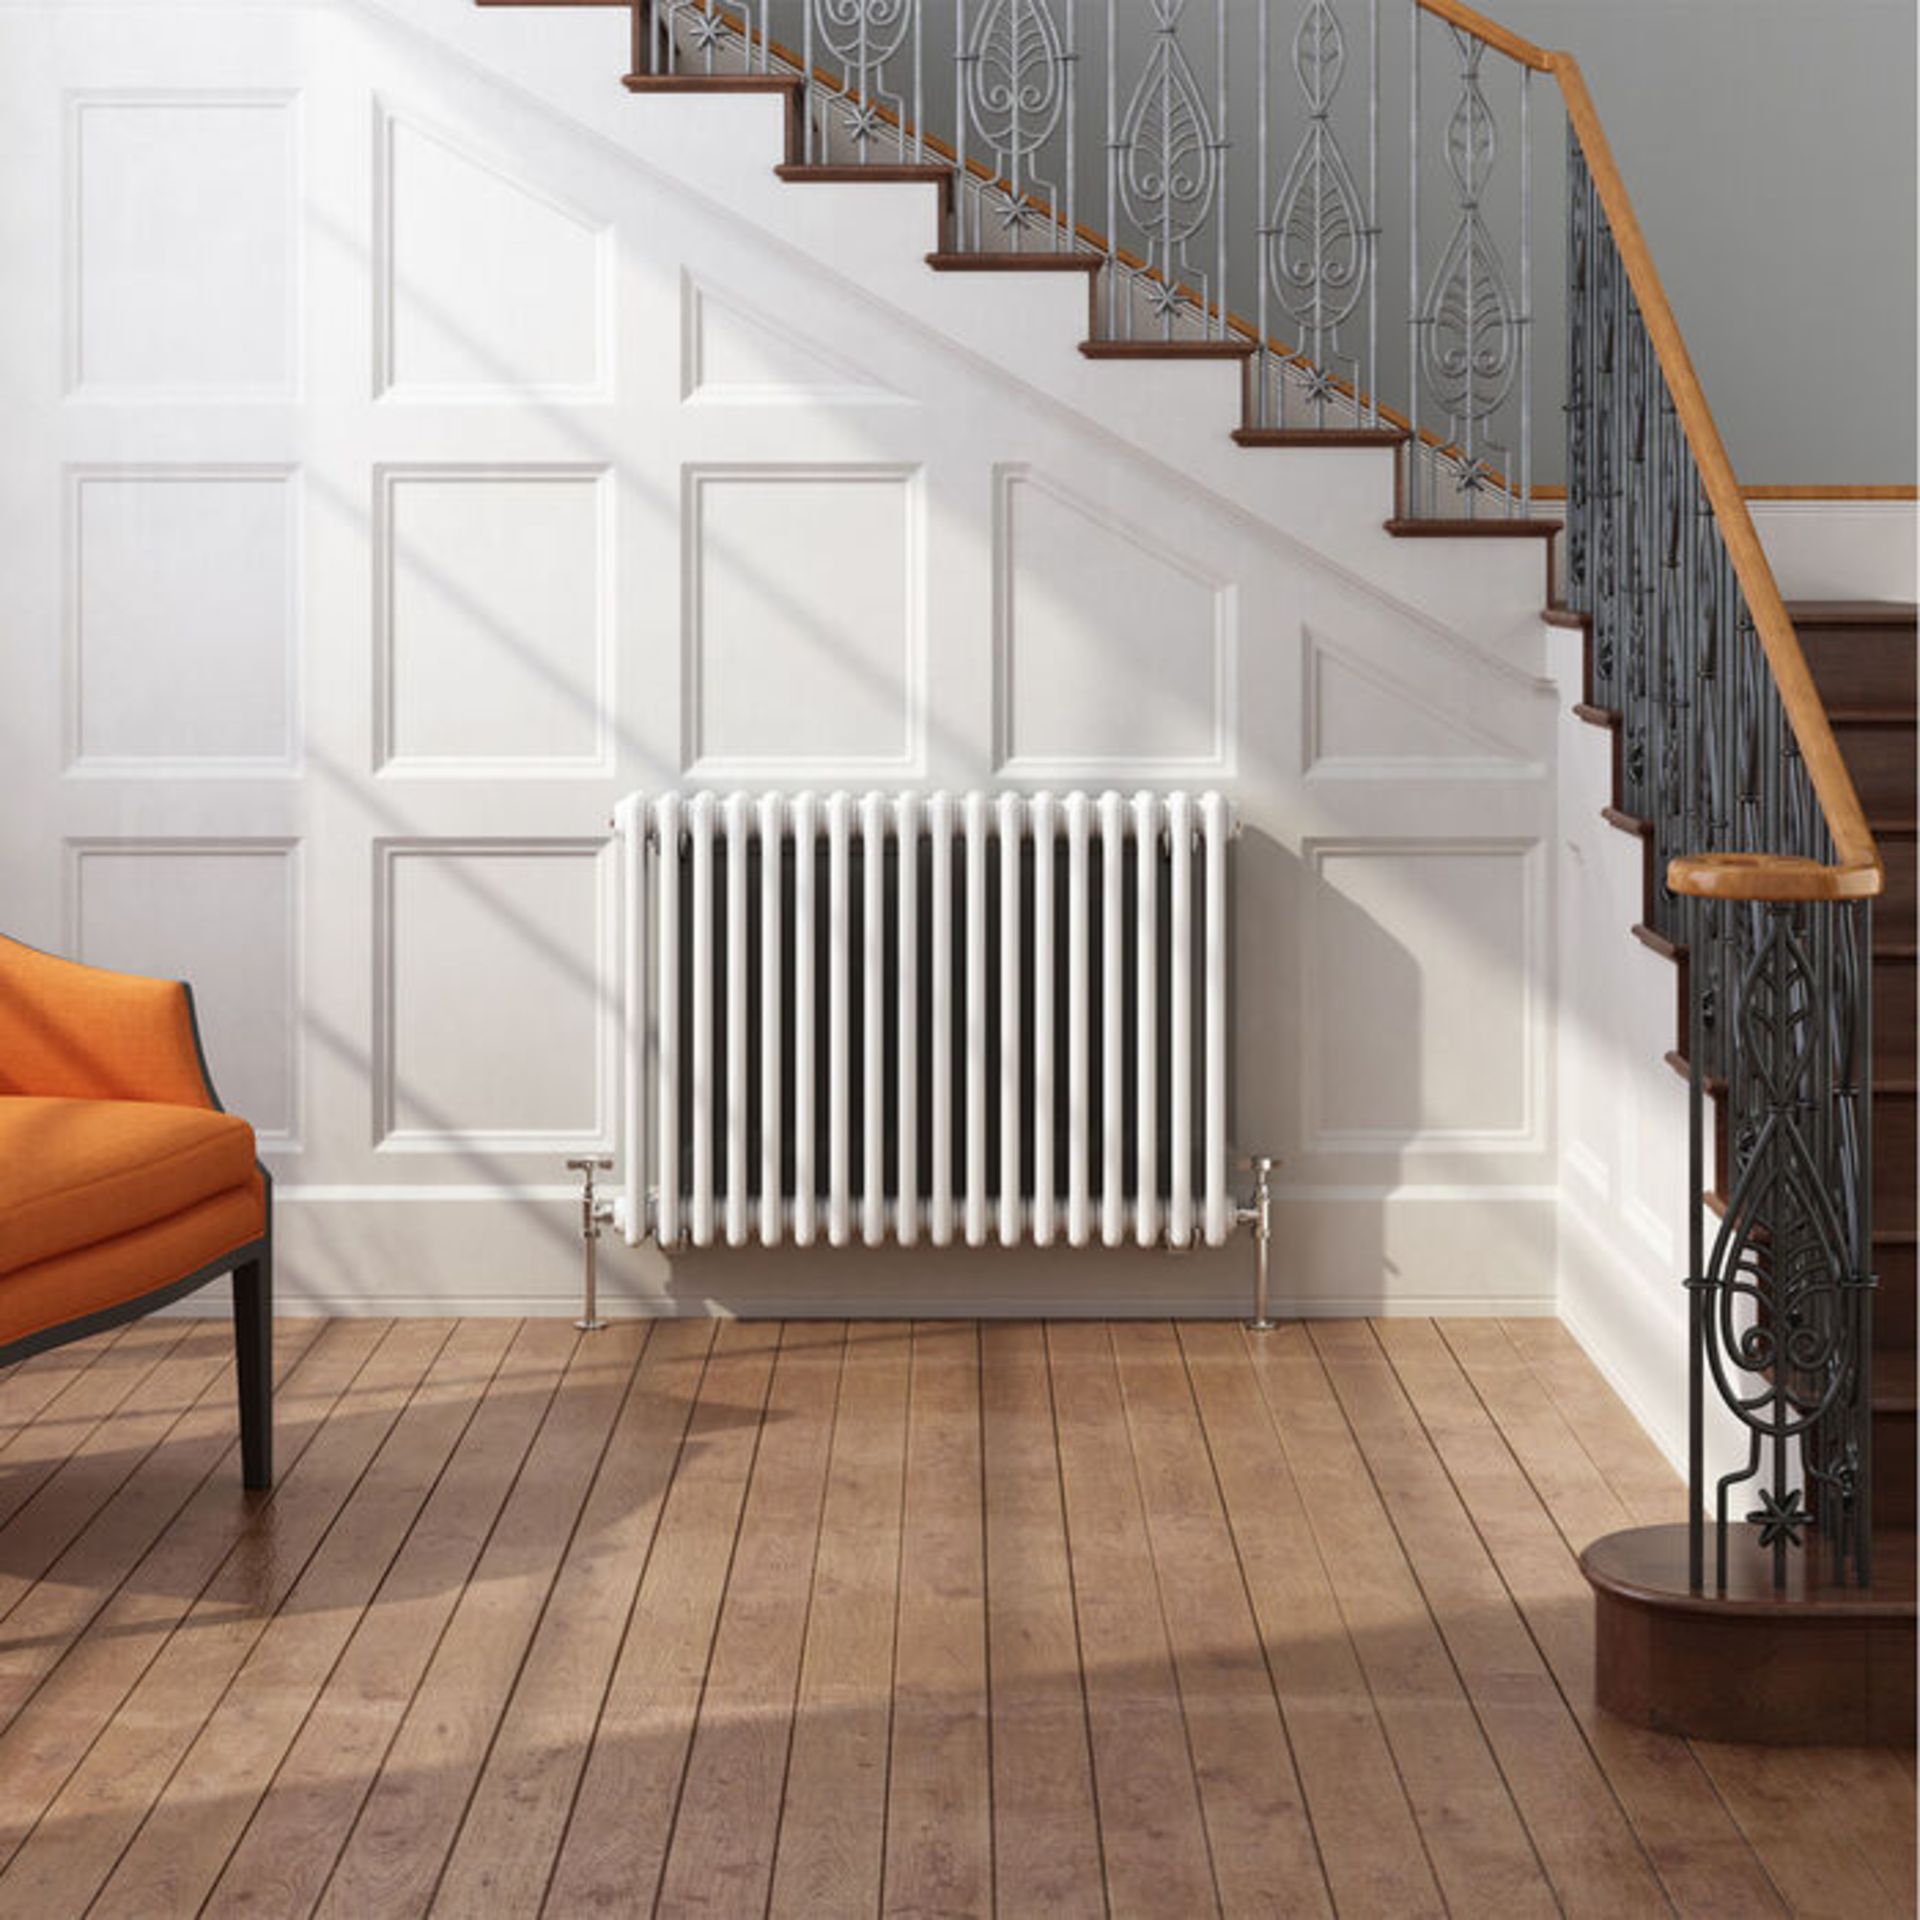 (J25) 500x812mm White Double Panel Horizontal Colosseum Traditional Radiator. RRP £424.99. For... - Image 2 of 4